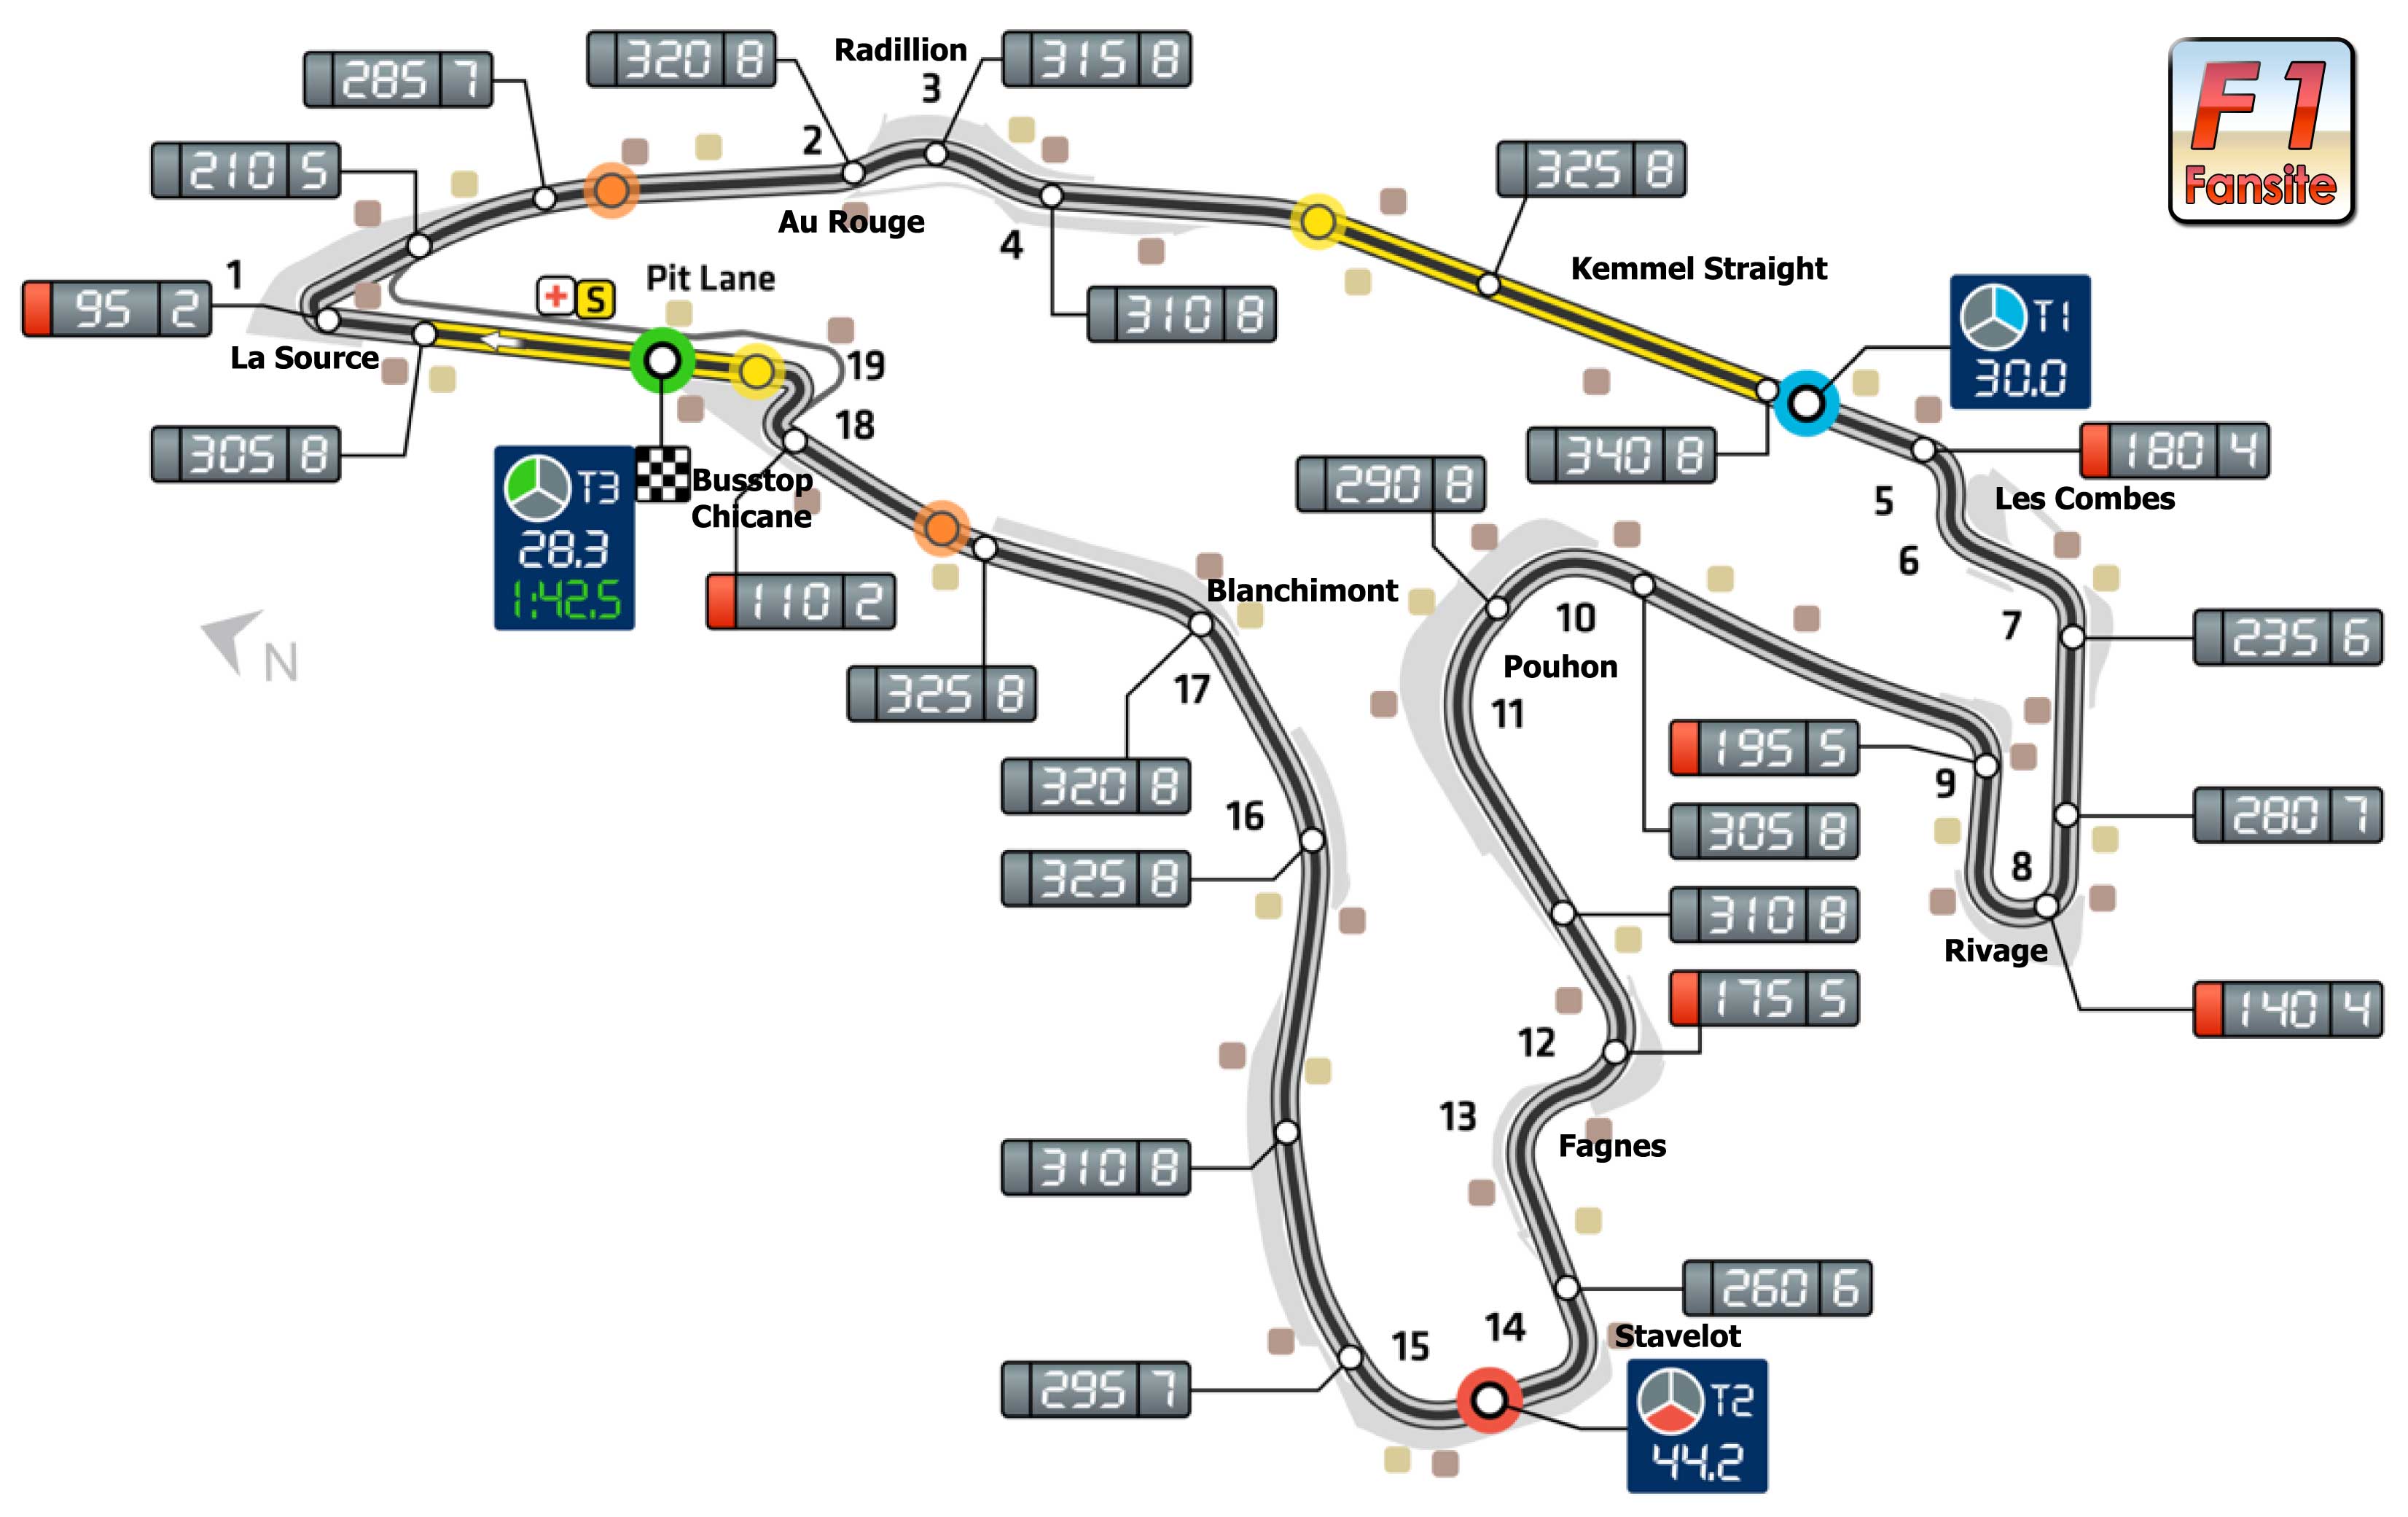 spa-francorchamps-2018-layout-2.jpg